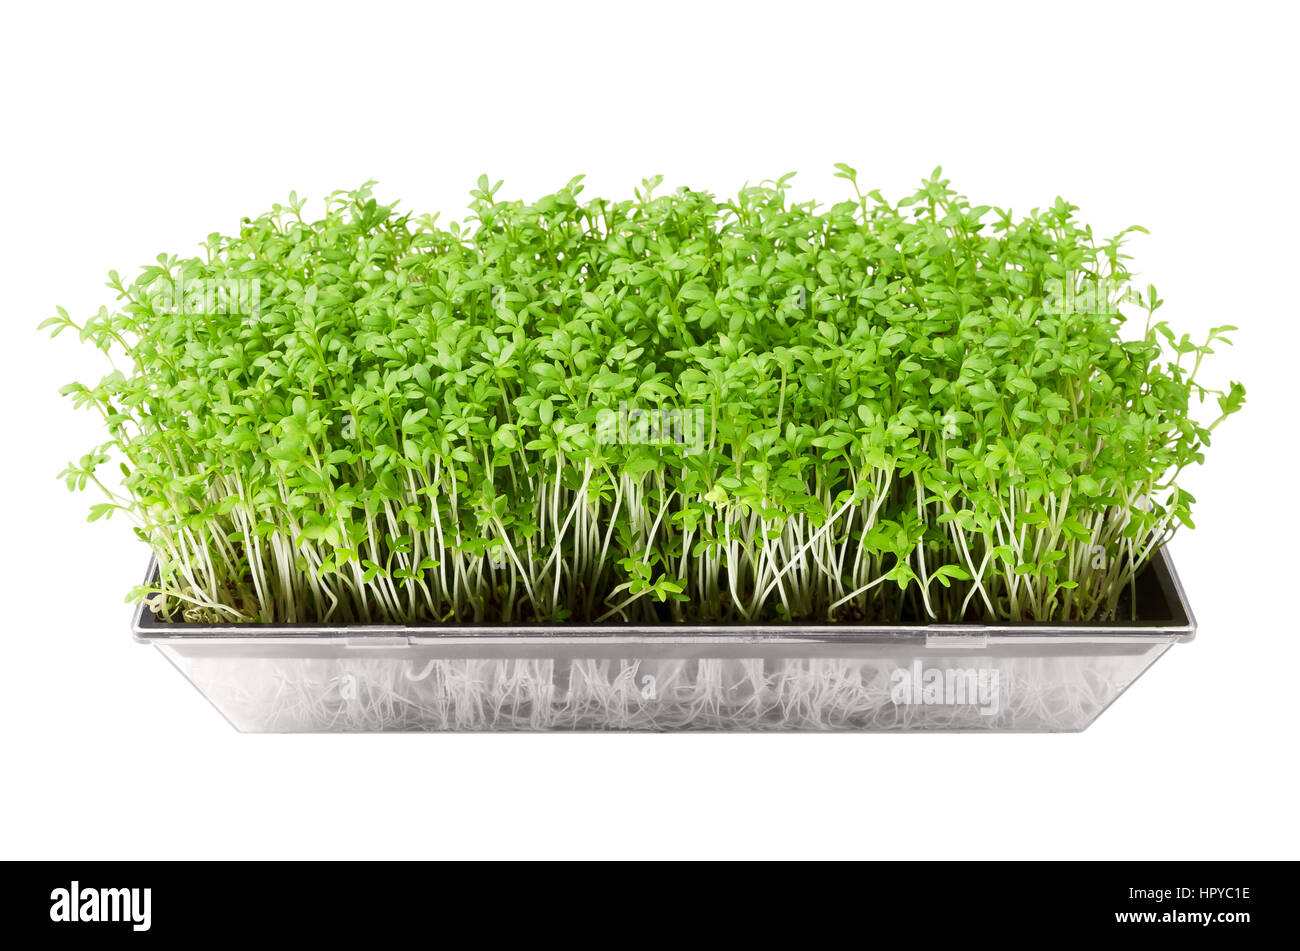 Garden cress in seed sprouter isolated over white. Young plants of Lepidium sativum, an edible herb and microgreen. Stock Photo